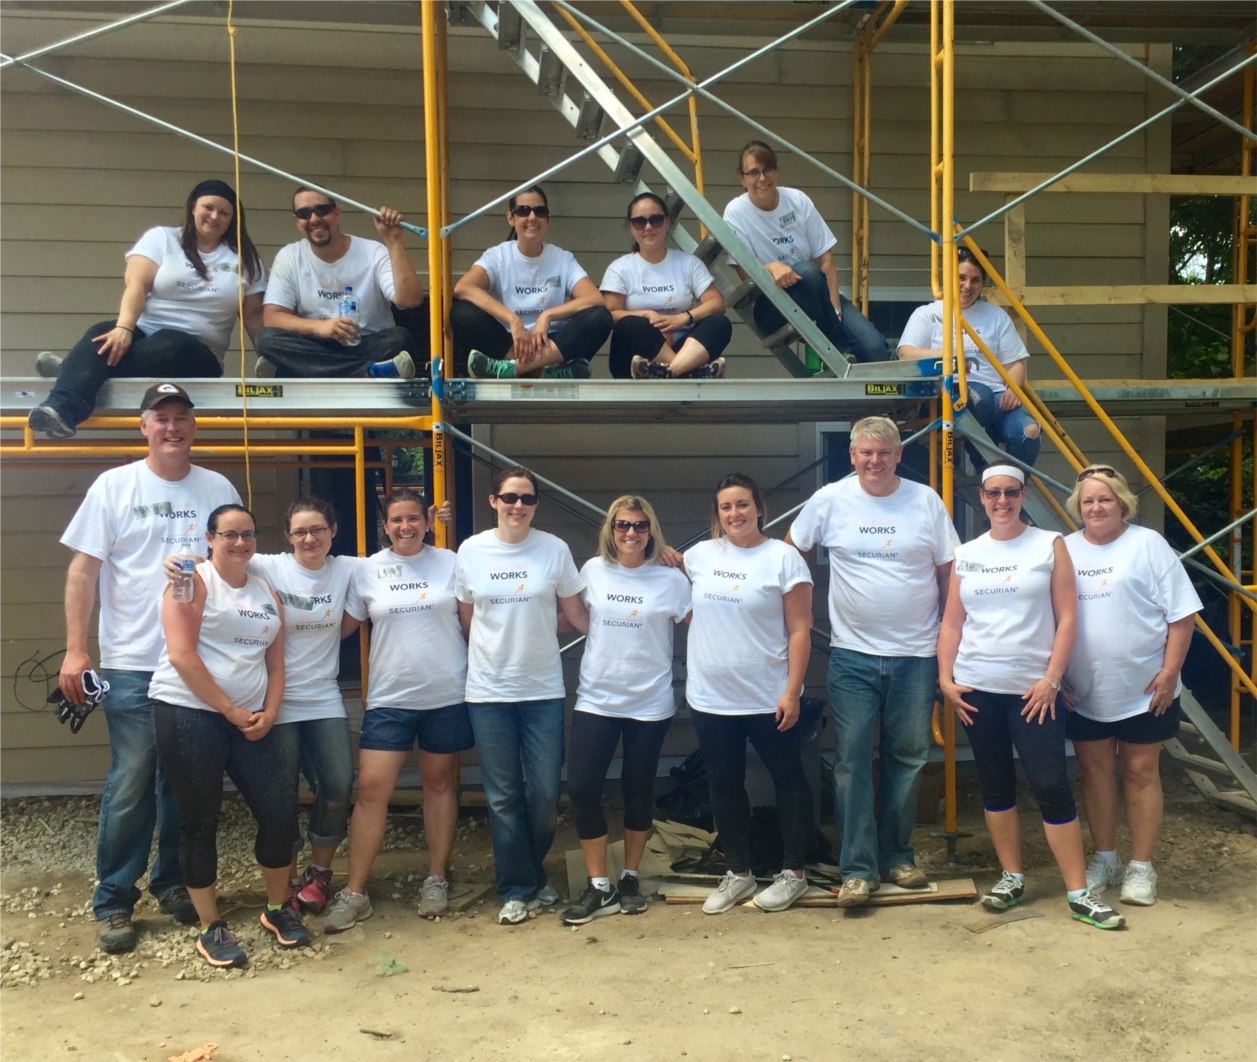 Associates take a break to pose for a picture while assisting in a Habitat for Humanity home build.  In 2016, associates volunteered 154 hours for this worthy cause.